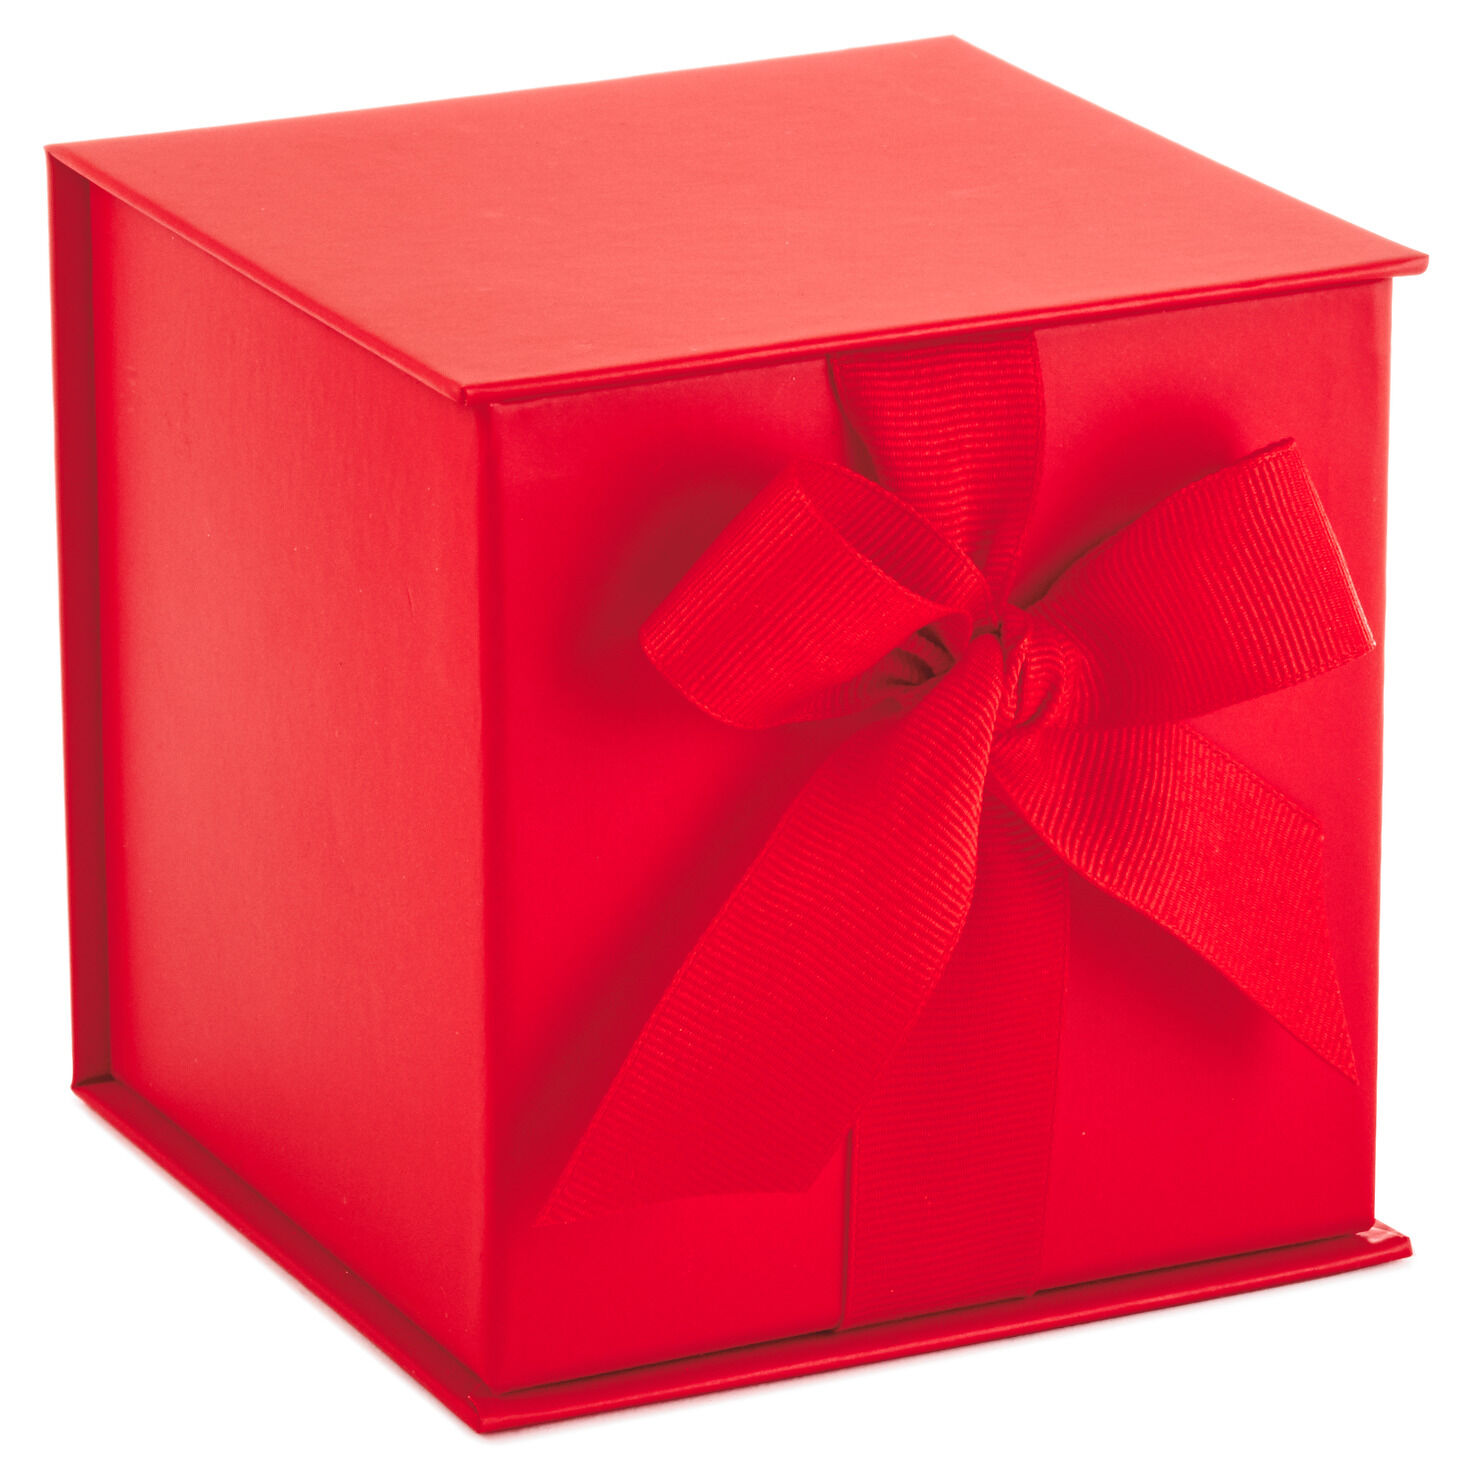  Boxes Fast 40 lb. Red Crinkle Paper Packing, Shipping, and  Moving Box Filler Shredded Paper for Box Package, Basket Stuffing, Bag, Gift  Wrapping, Holidays, Crafts, and Decoration : Health & Household